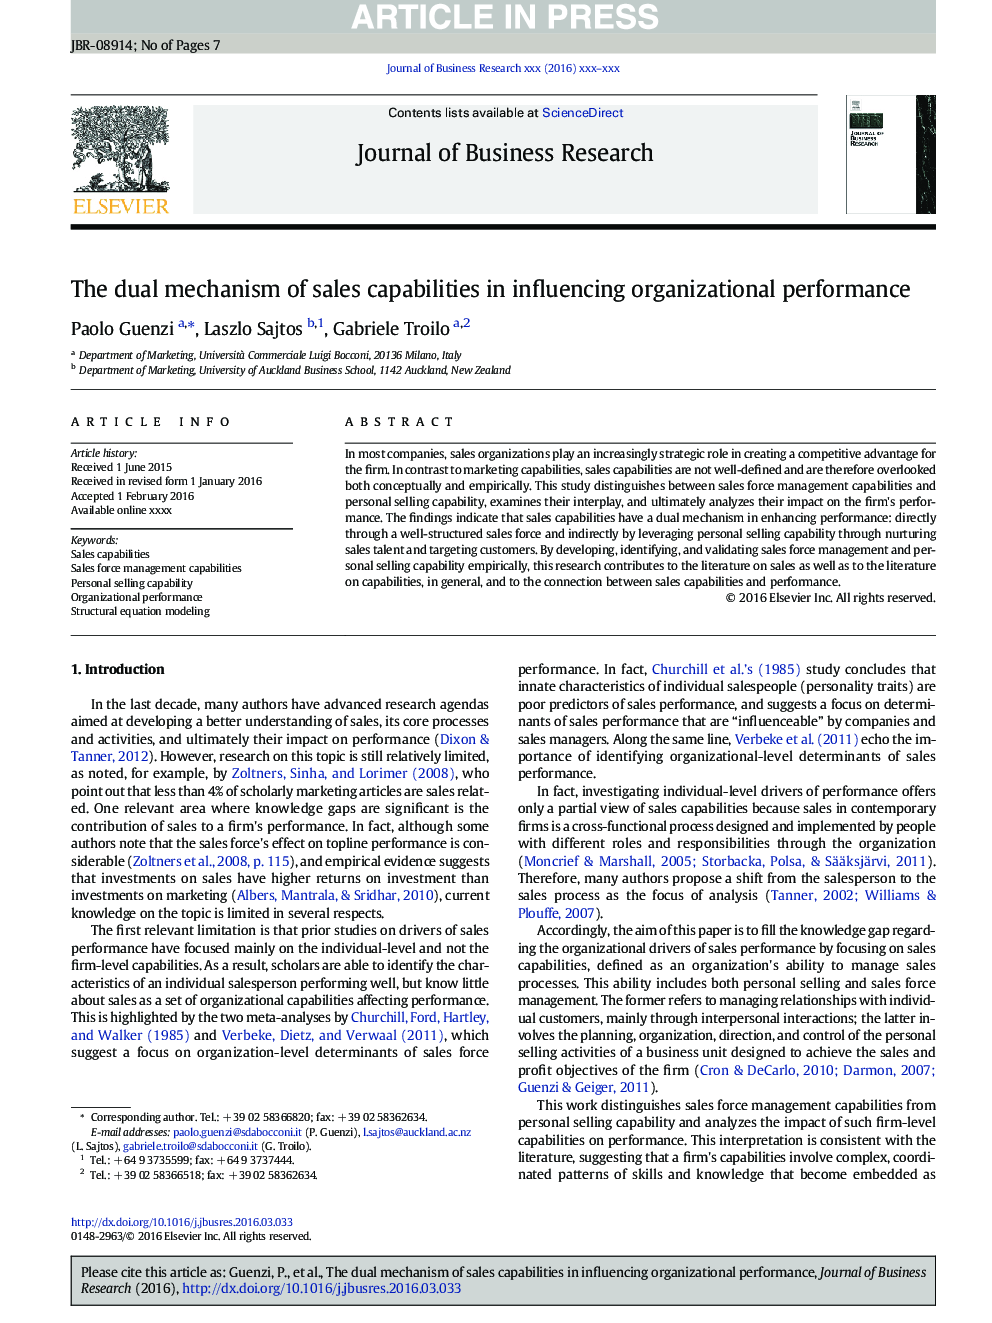 The dual mechanism of sales capabilities in influencing organizational performance